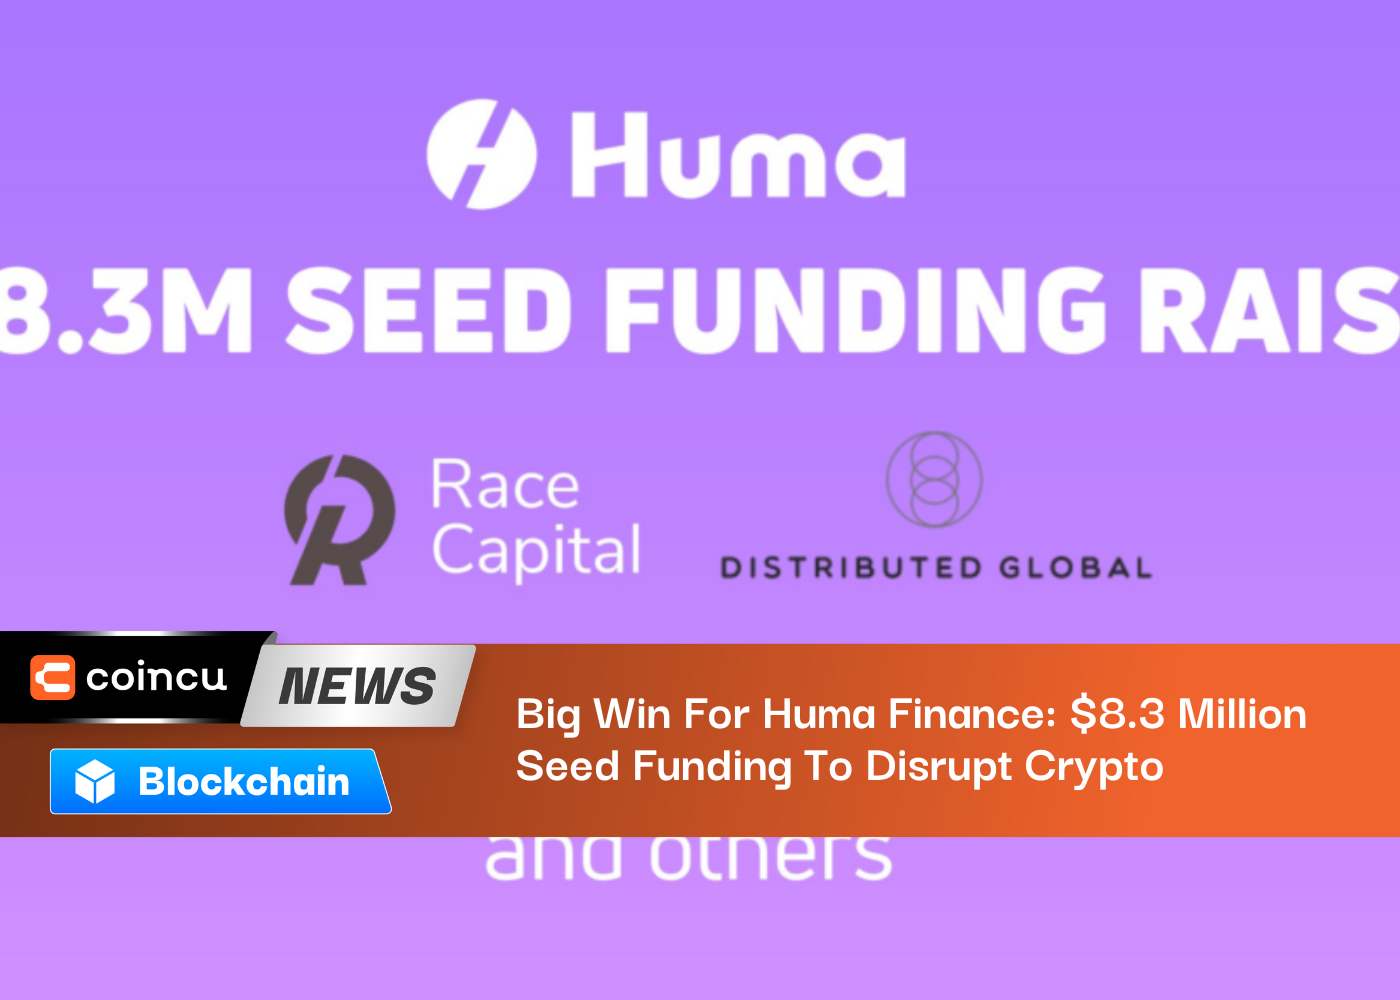 Big Win For Huma Finance: $8.3 Million Seed Funding To Disrupt Crypto